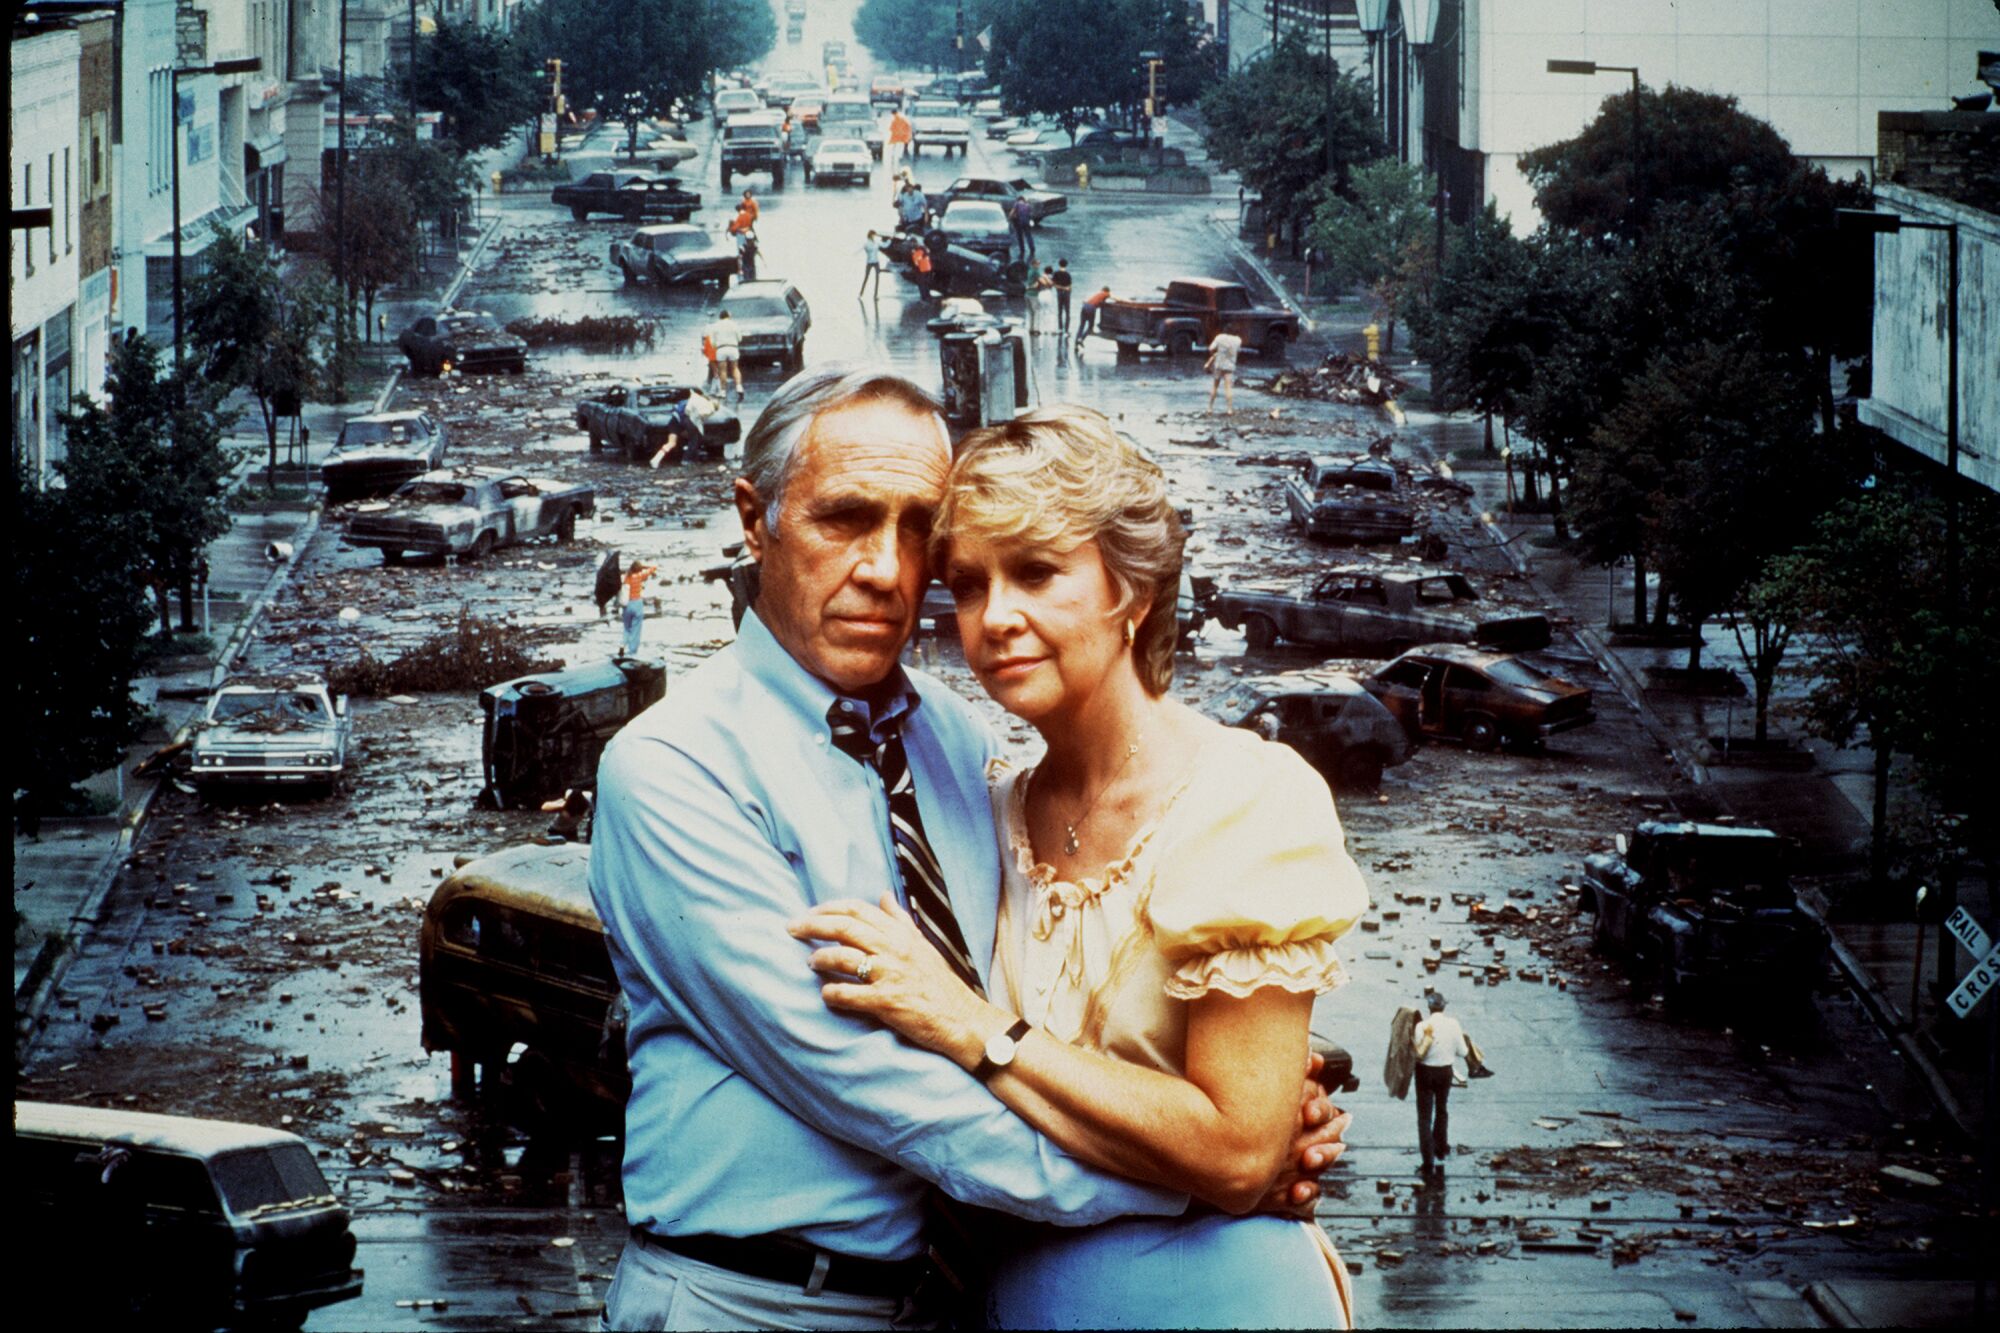 A photo illustration from "The Day After" shows actors Jason Robards and Georgann Johnson embracing before a devastated city.